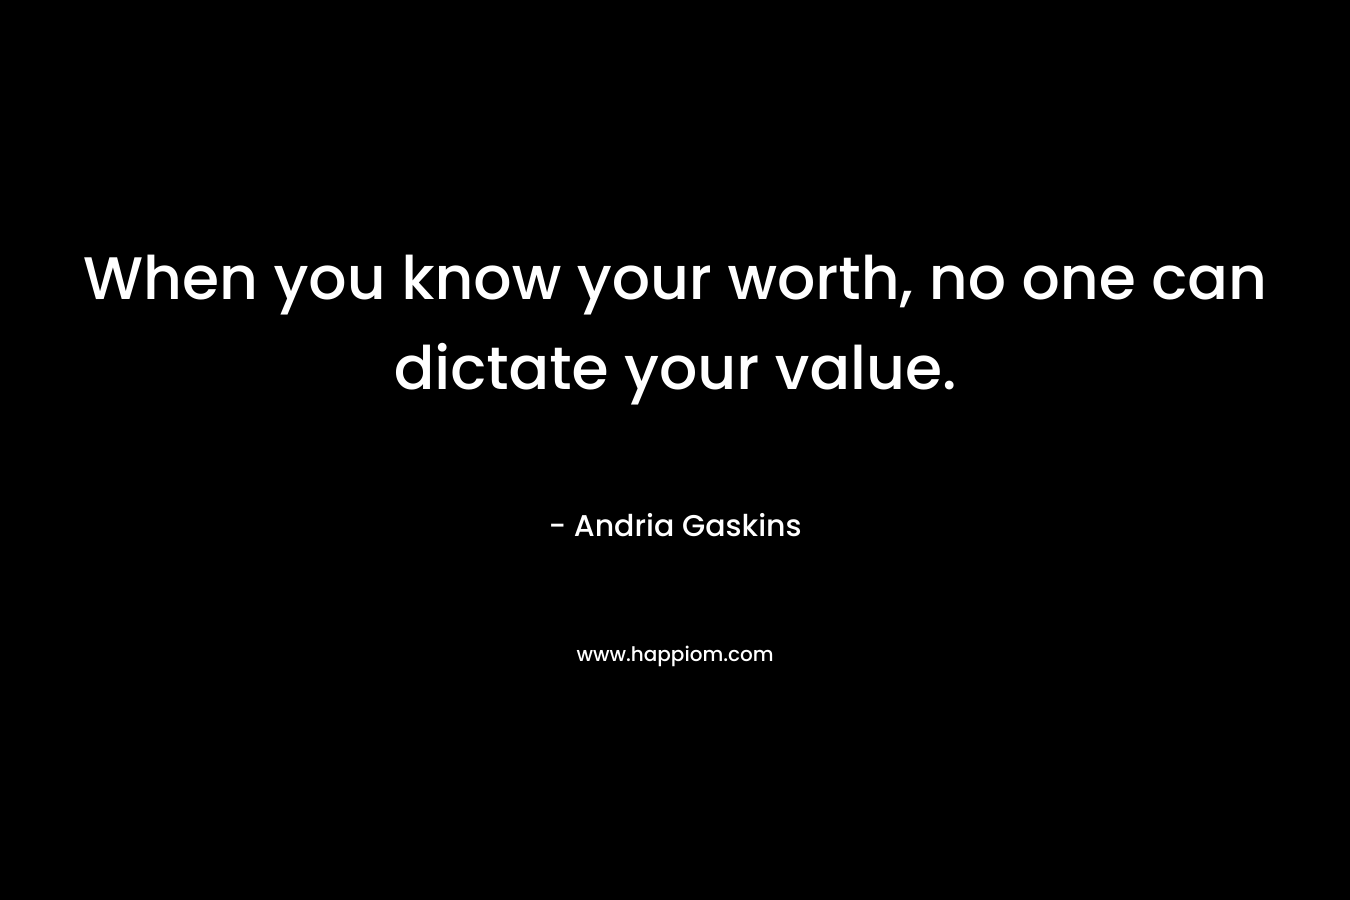 When you know your worth, no one can dictate your value. – Andria Gaskins